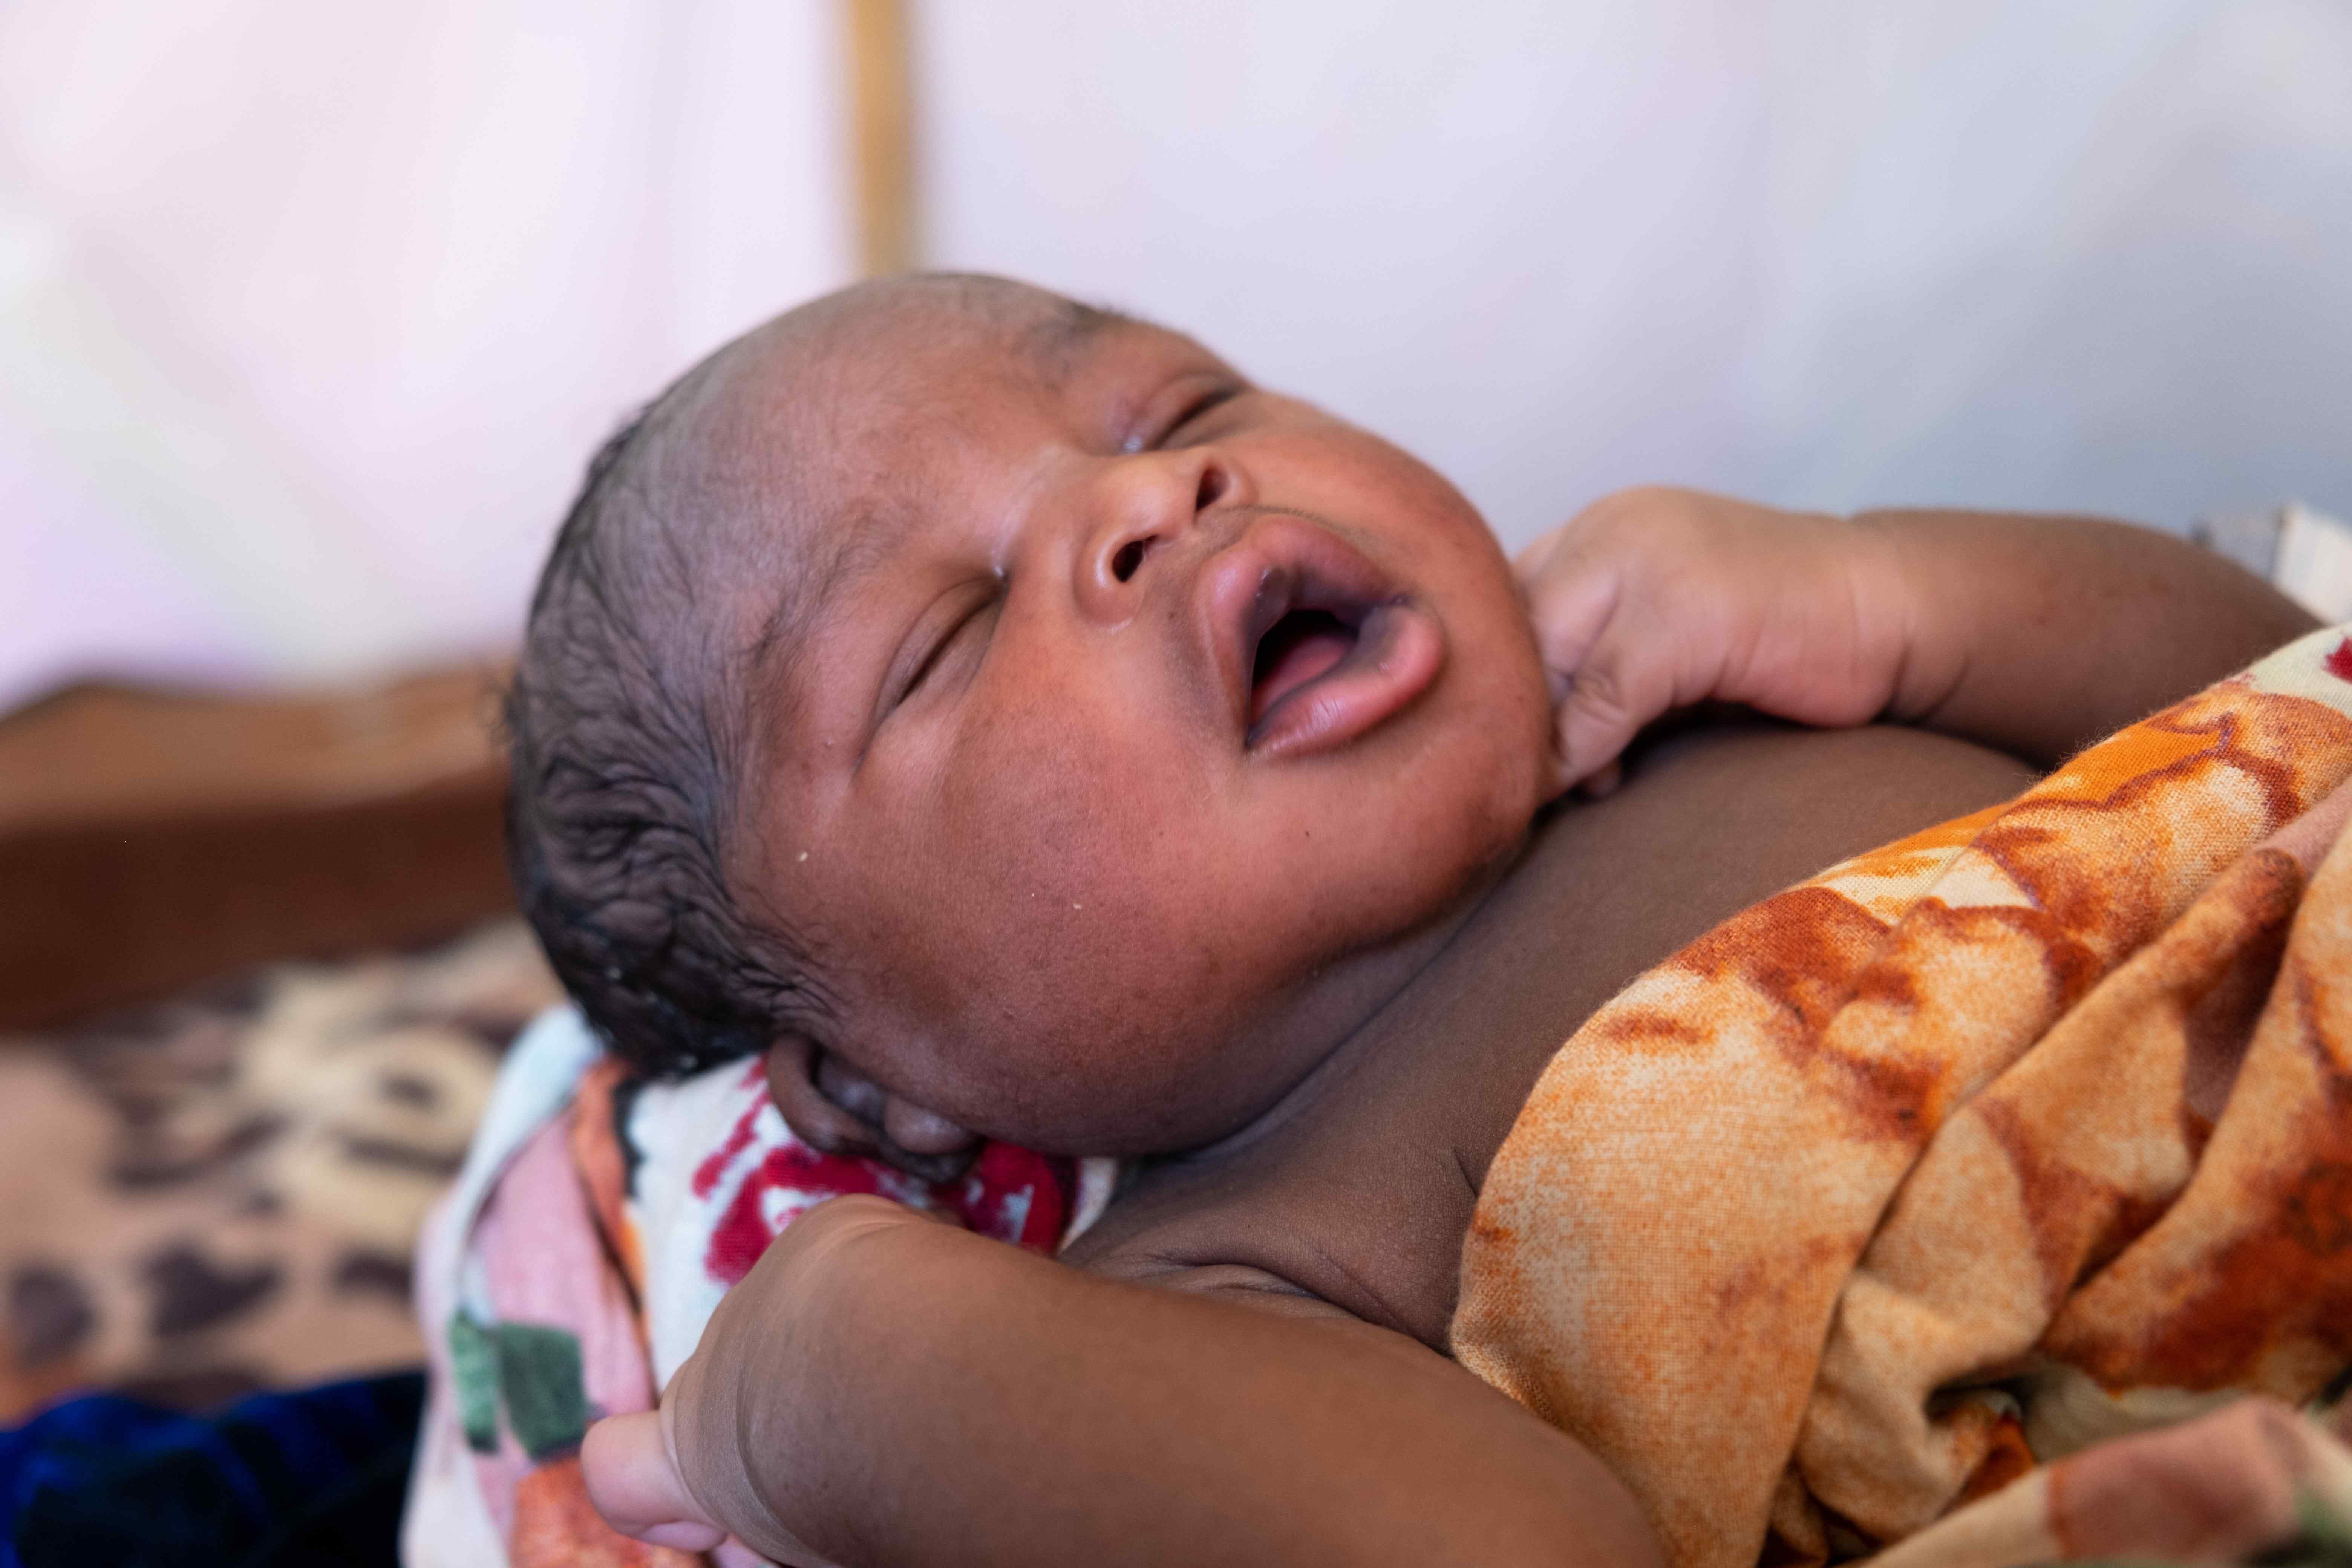 30 May 2023. Gaga refugee camp, Chad. Raouda’s baby, Abdelrahim, is born a few hours earlier in the IRC's health center.